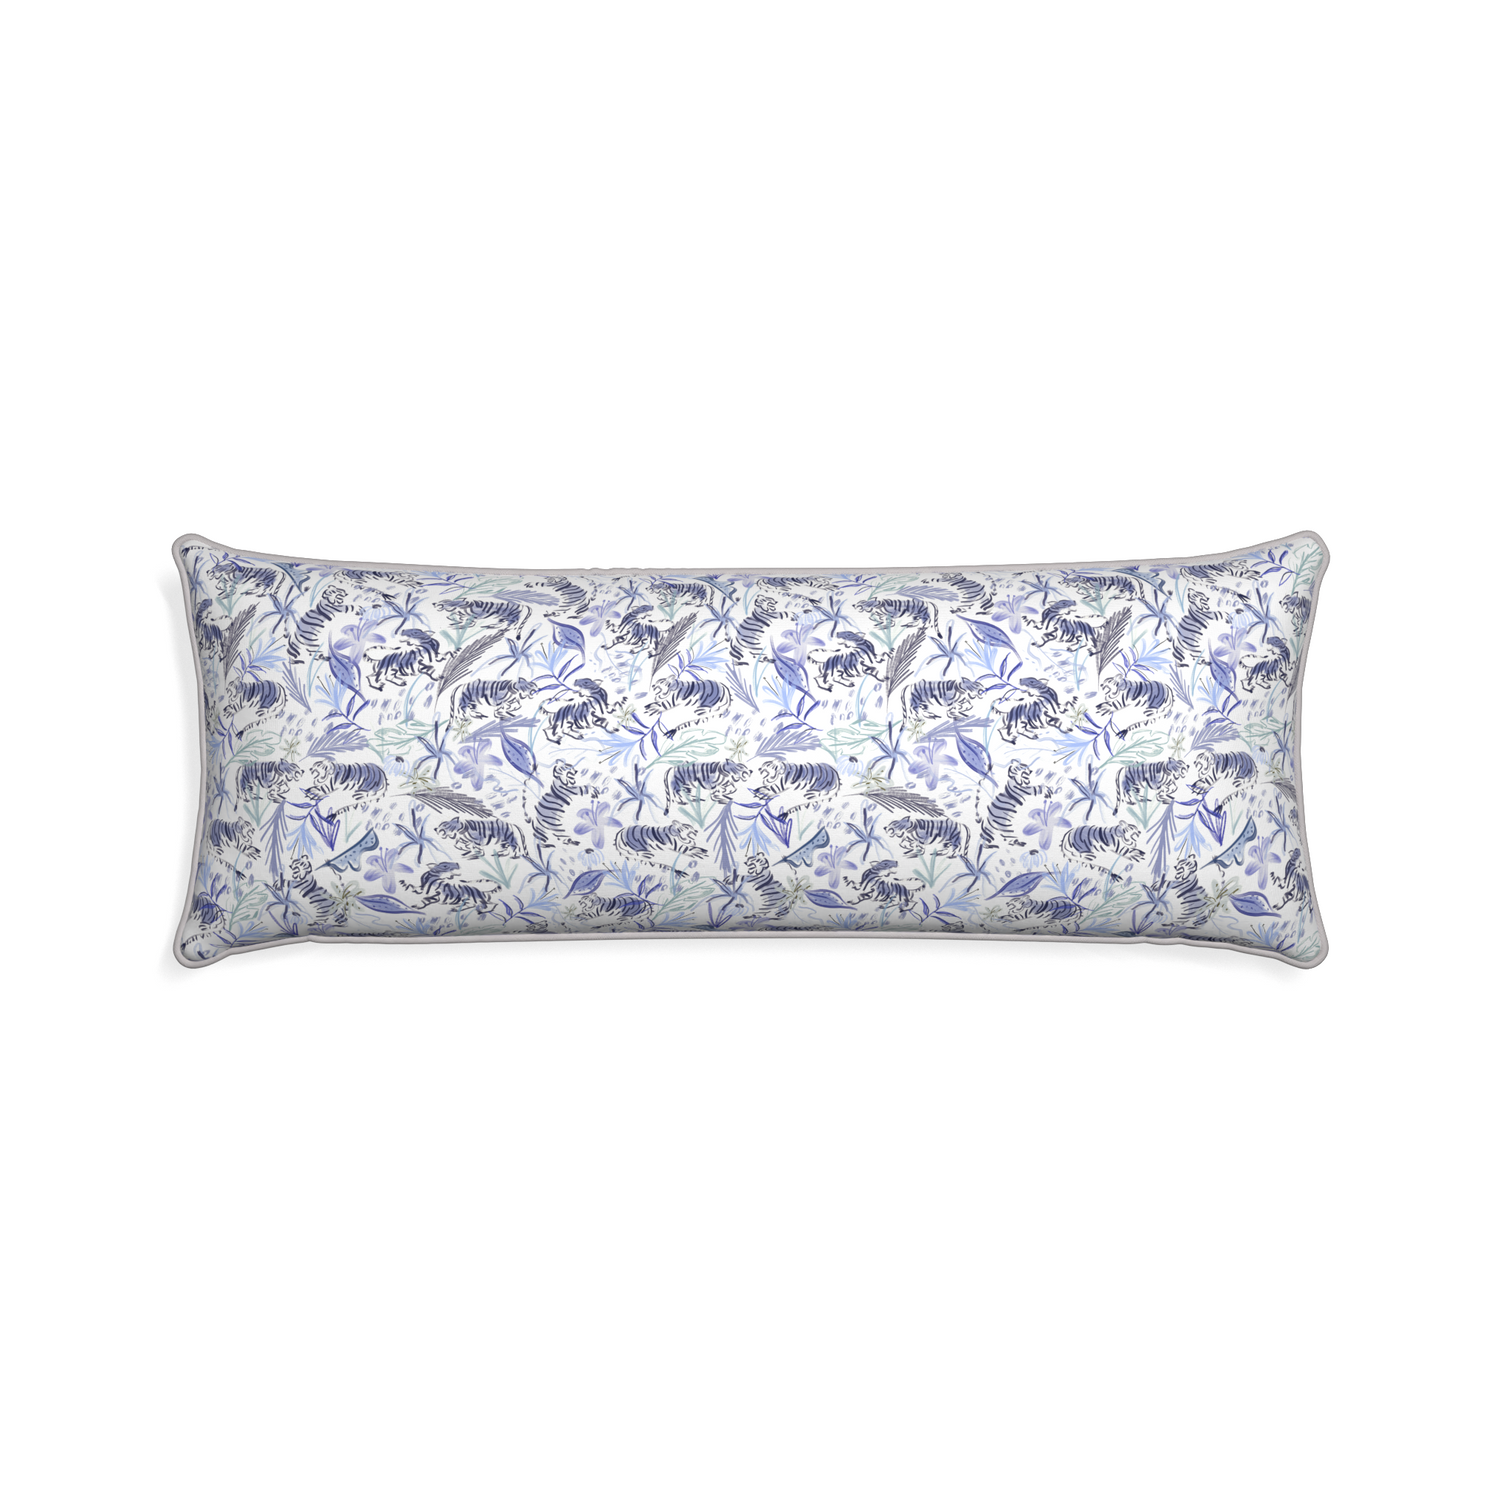 Xl-lumbar frida blue custom blue with intricate tiger designpillow with pebble piping on white background